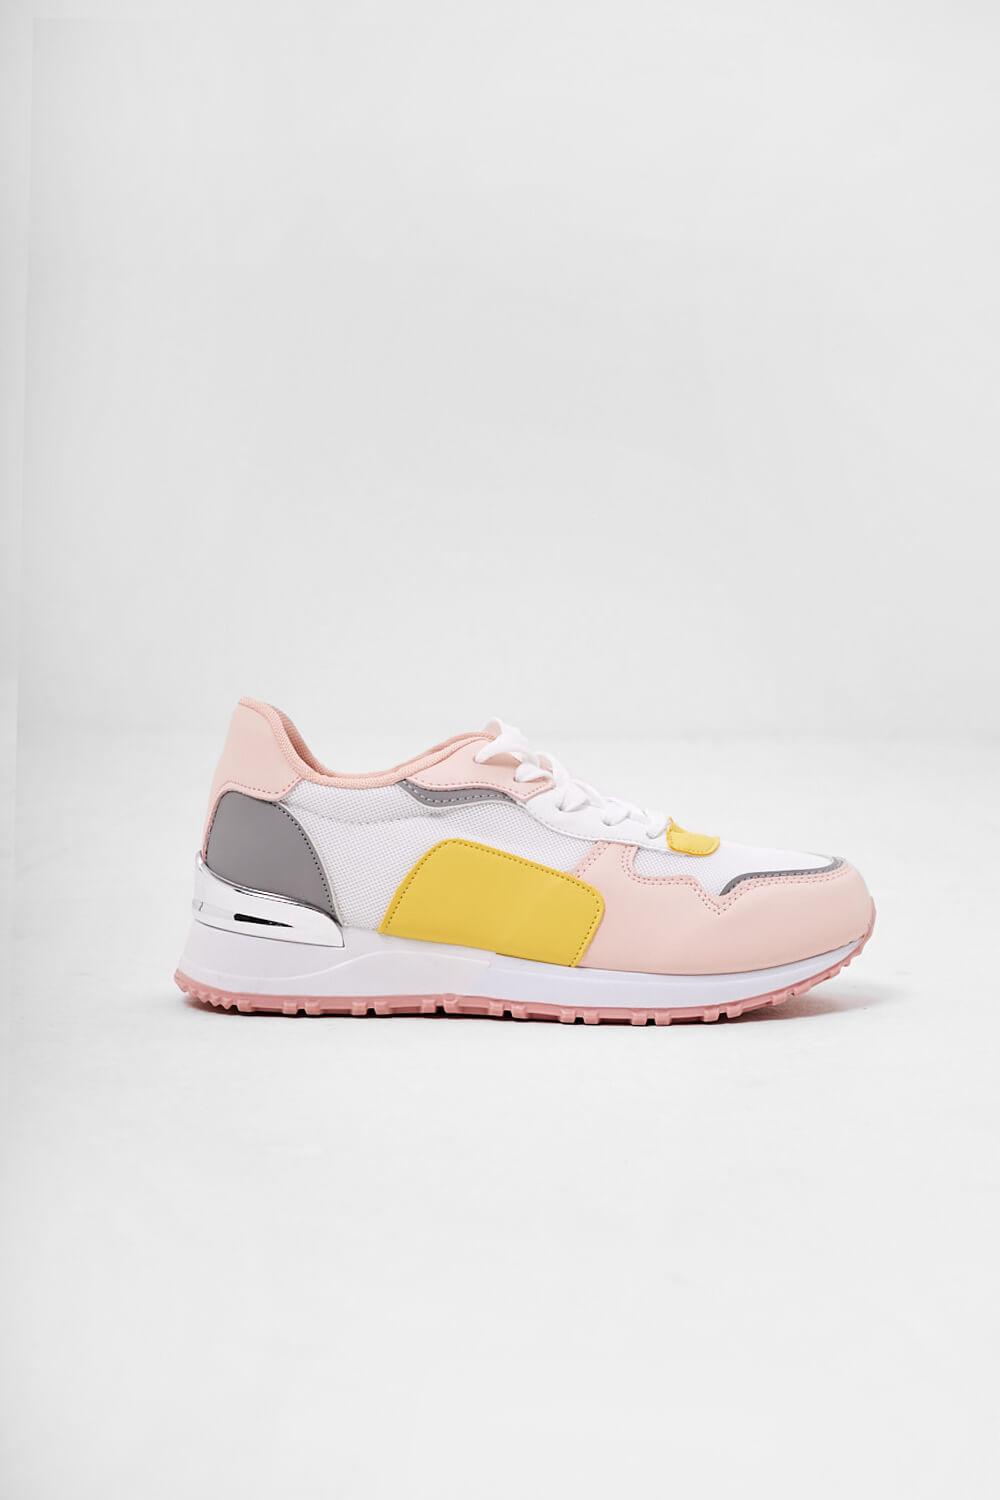 No Doubt Peyton Colour Block Trainers in Pink | iCLOTHING - iCLOTHING